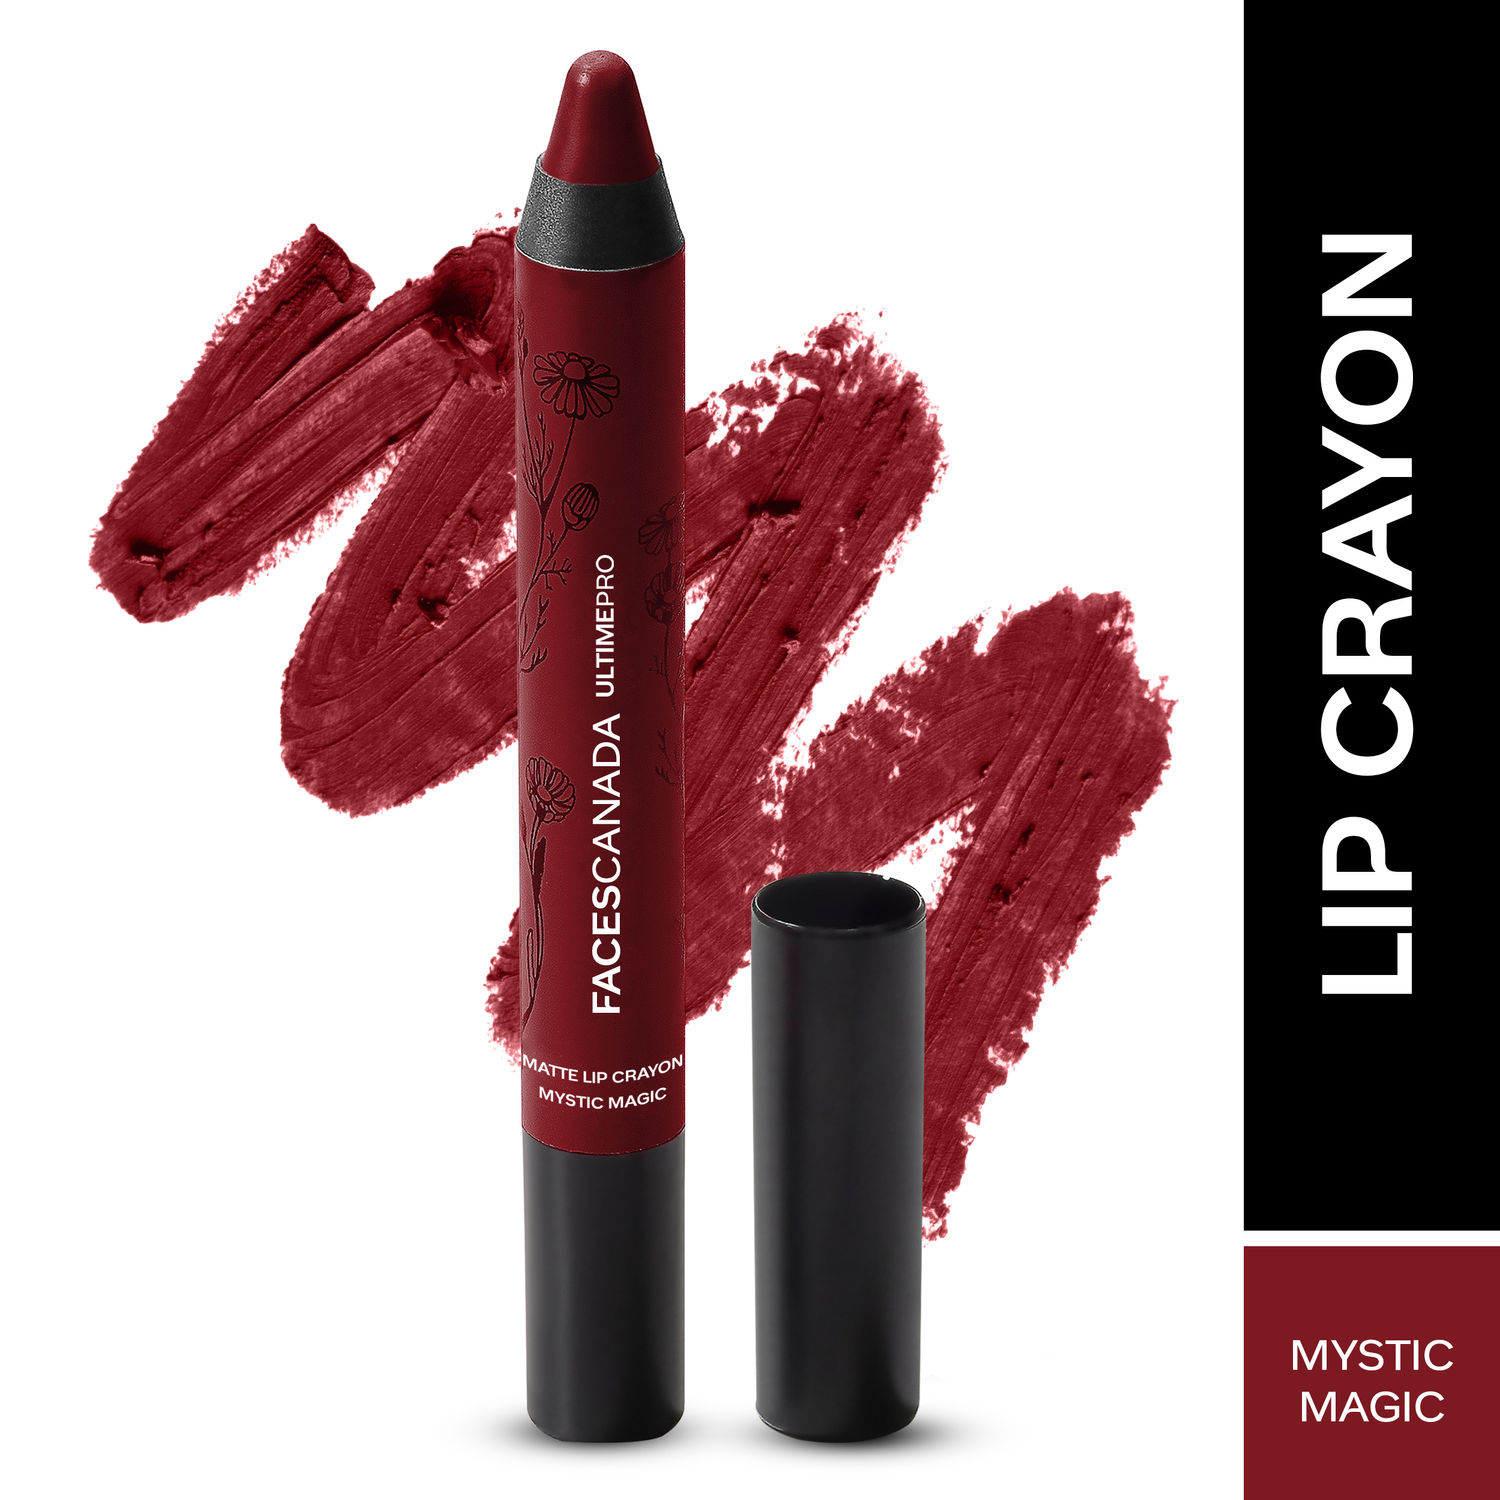 Buy FACES CANADA Ultime Pro Matte Lip Crayon - Mystic Magic, 2.8g | Long Stay | Smooth Creamy Matte Texture | One Stroke Intense Color | Chamomile & Cocoa Butter Enriched - Purplle